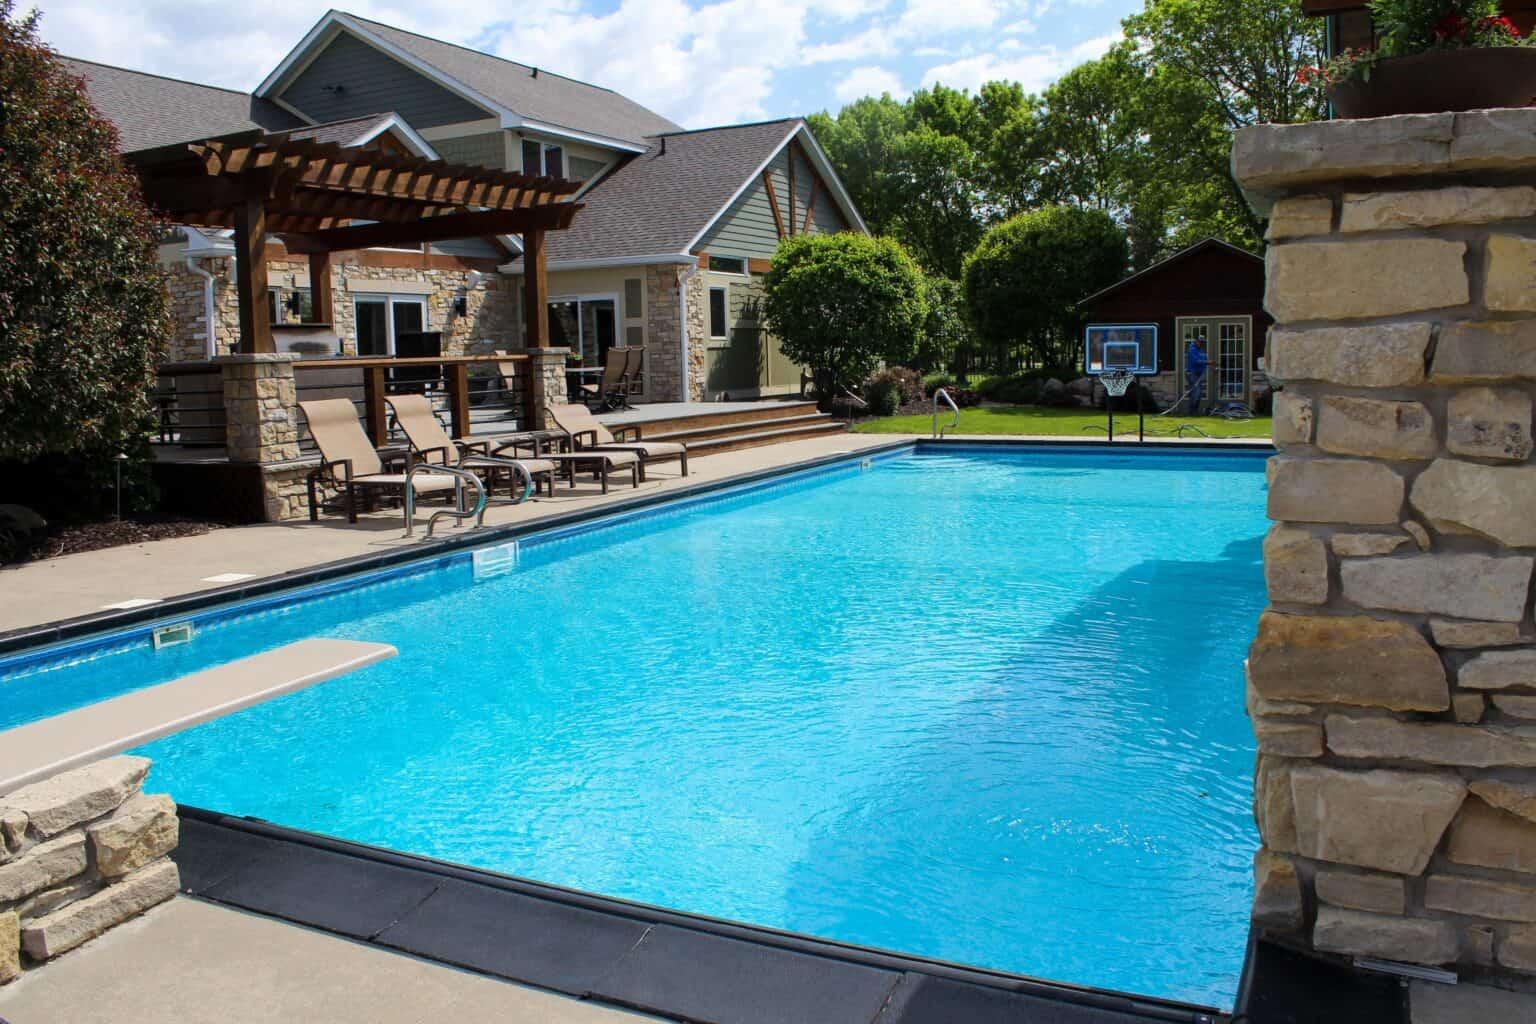 8 Ways (Plus 1!) to Know You've Found the Right Swimming Pool Builder